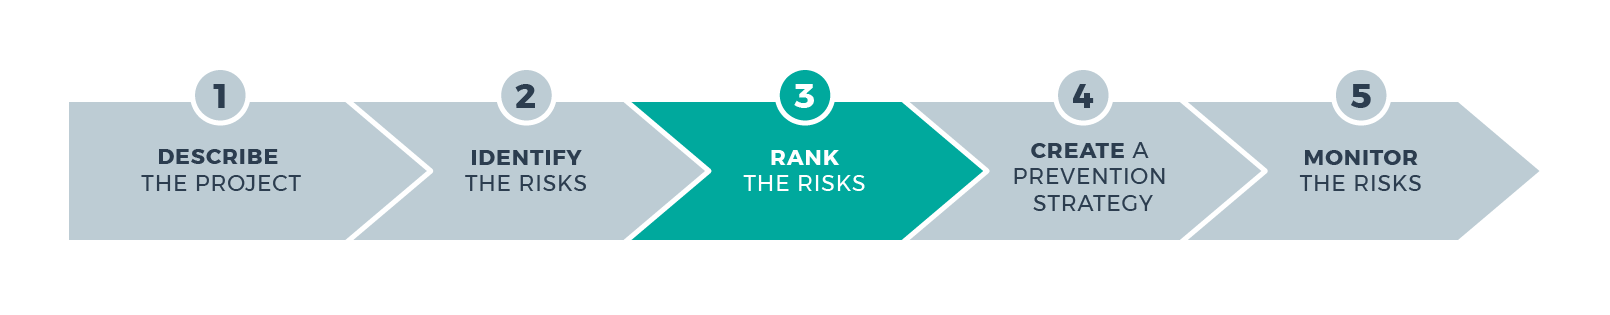 The life cycle of the project phase 3 Ranking the risks is highlighted